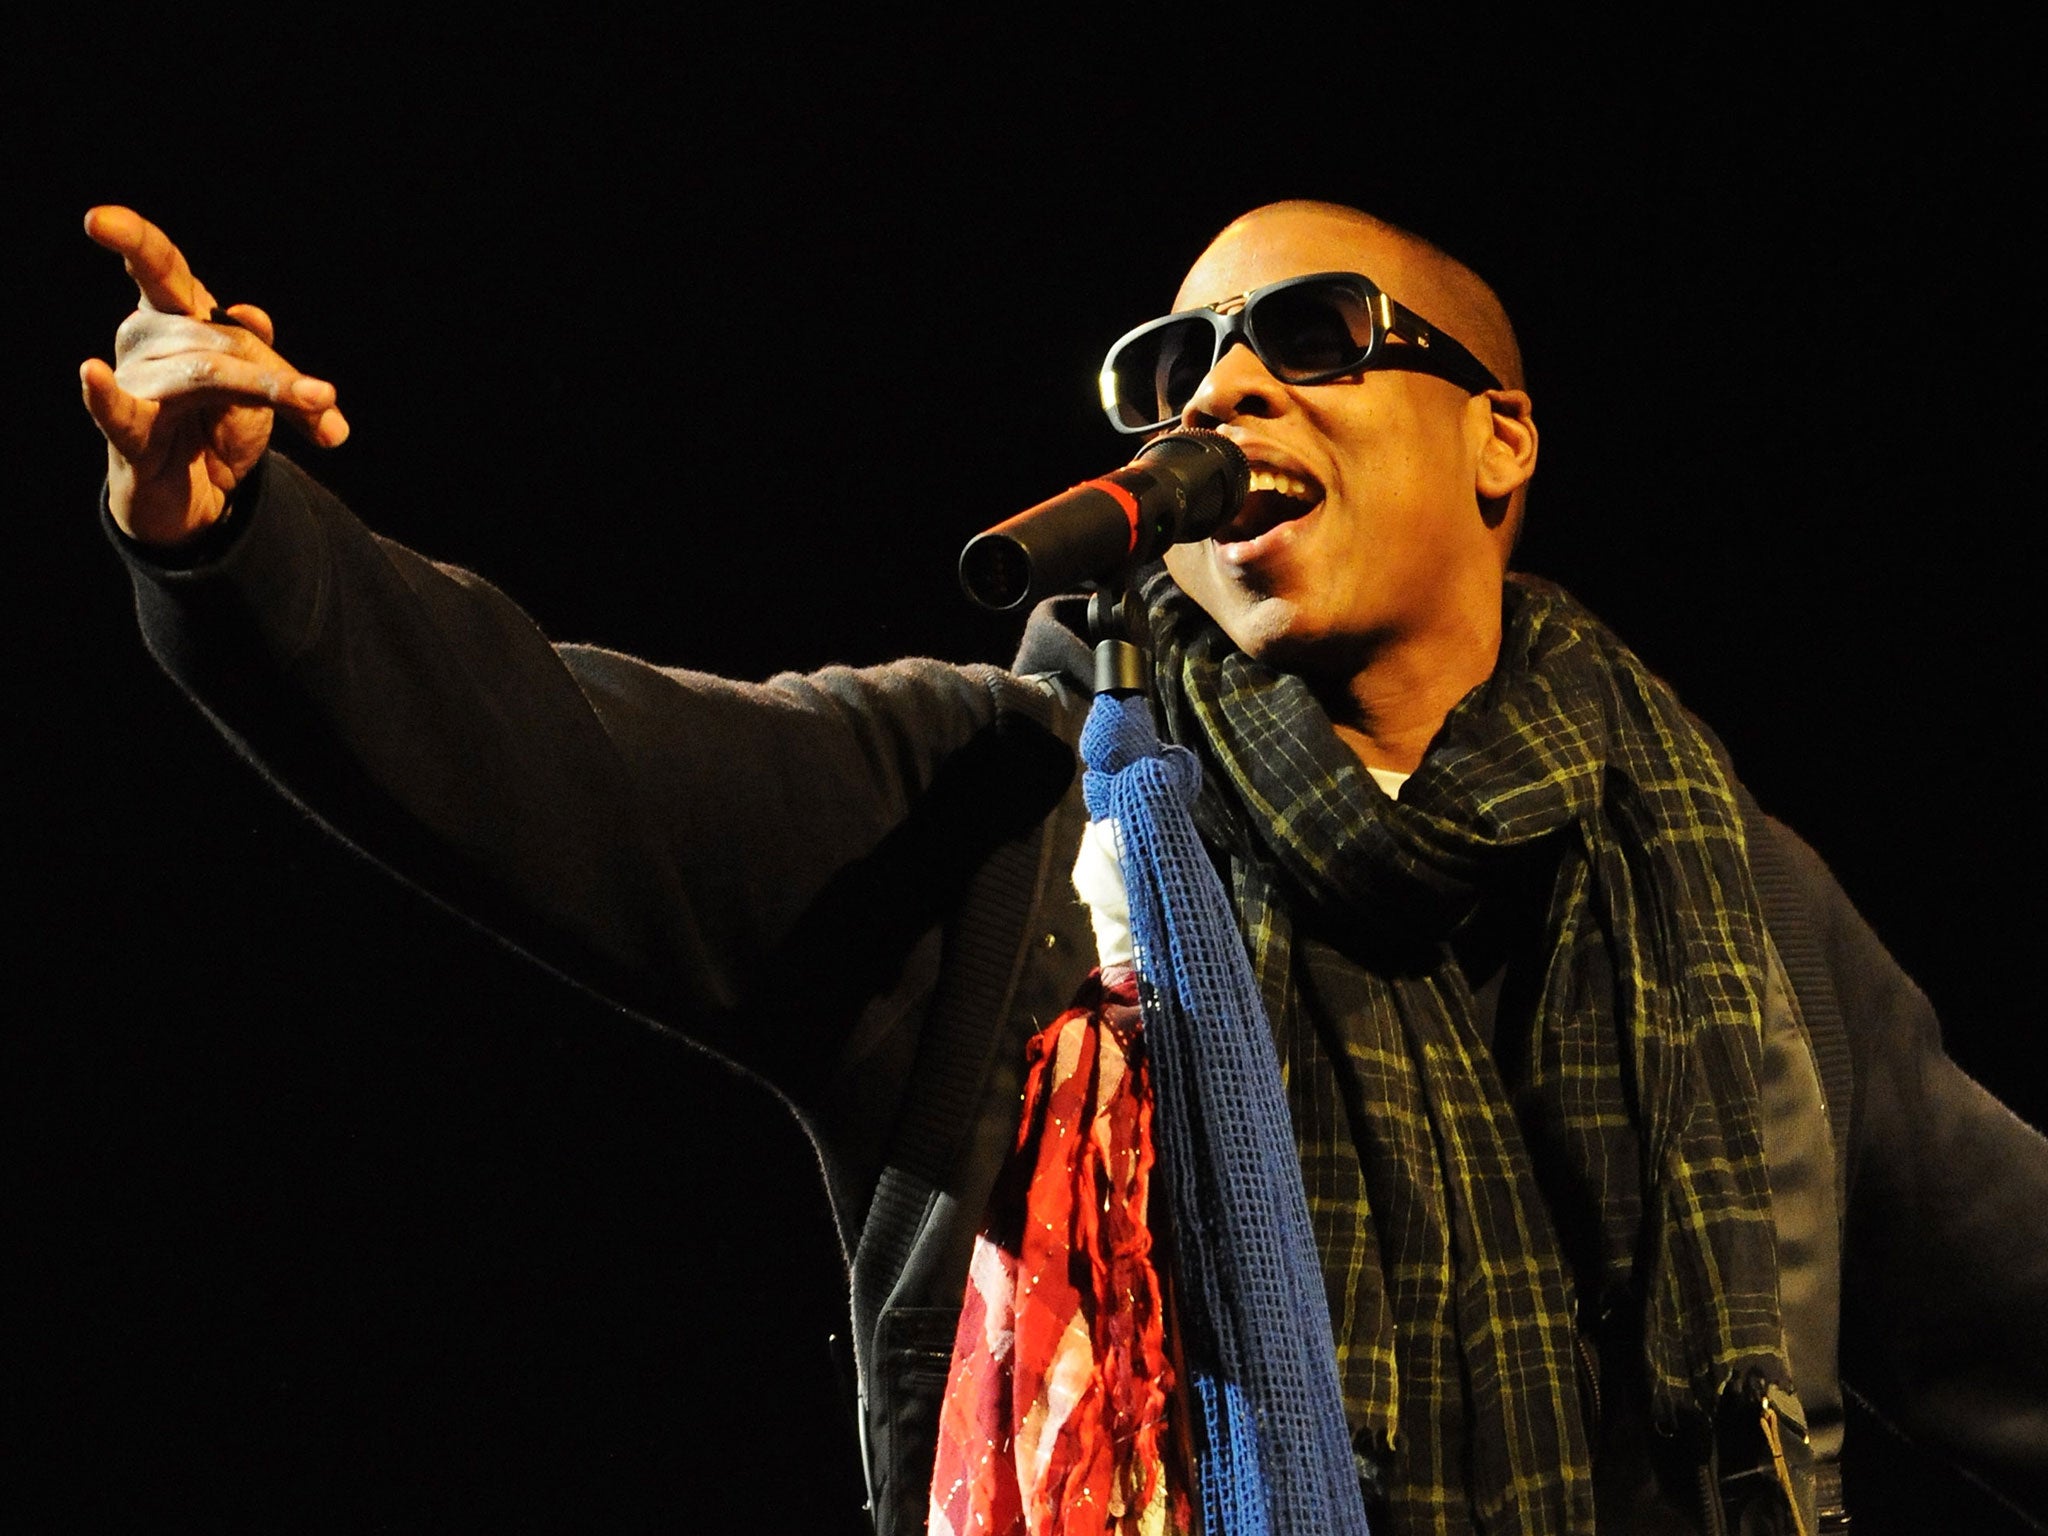 Rapper Jay Z performs on the Pyramid Stage at Glastonbury in 2008